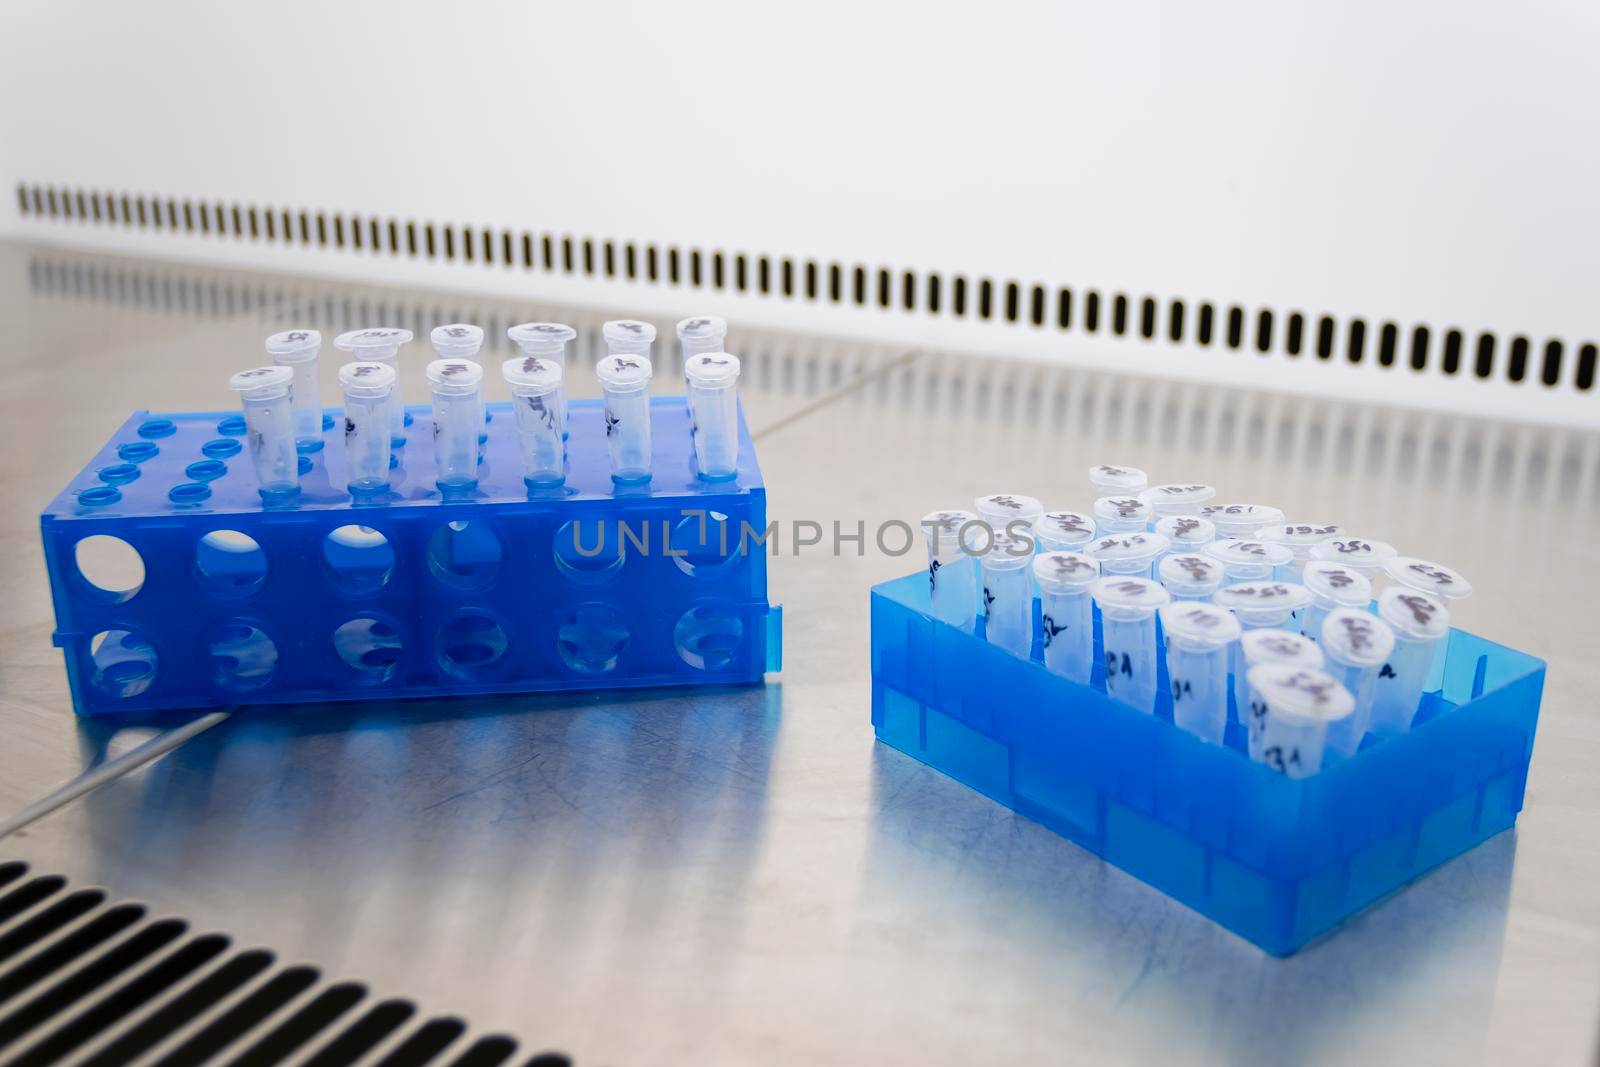 Two racks withbacterial samples for experiment in the laboratory.